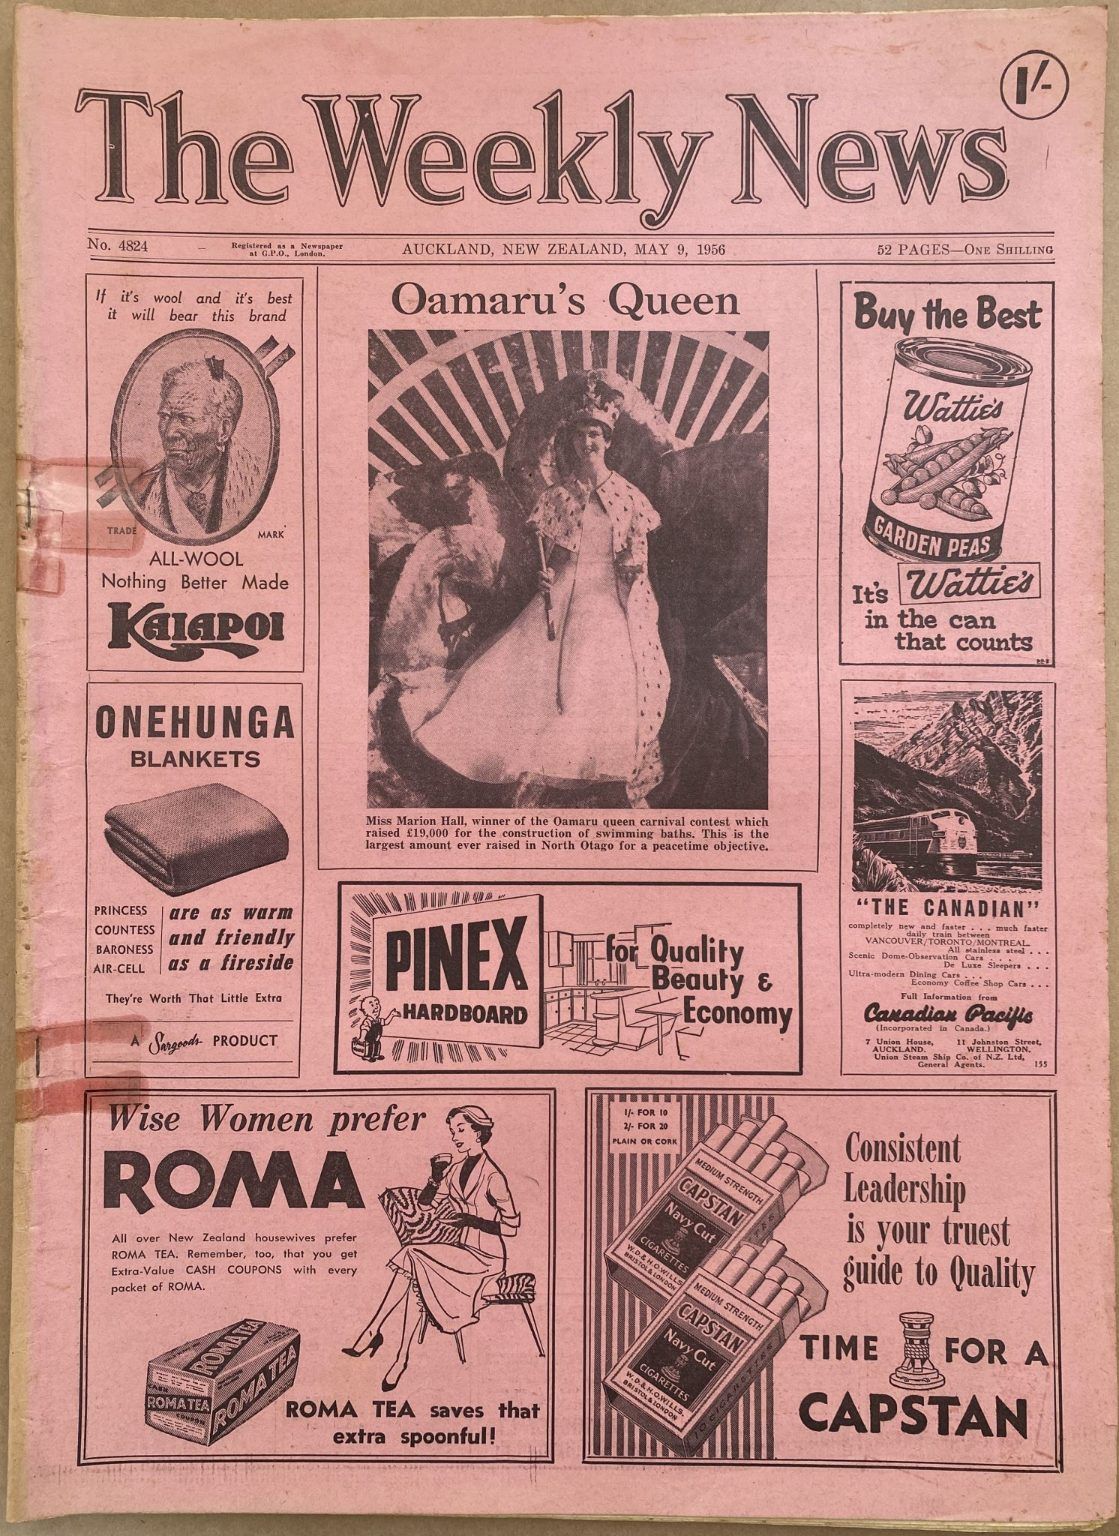 OLD NEWSPAPER: The Weekly News - No. 4824, 9 May 1956